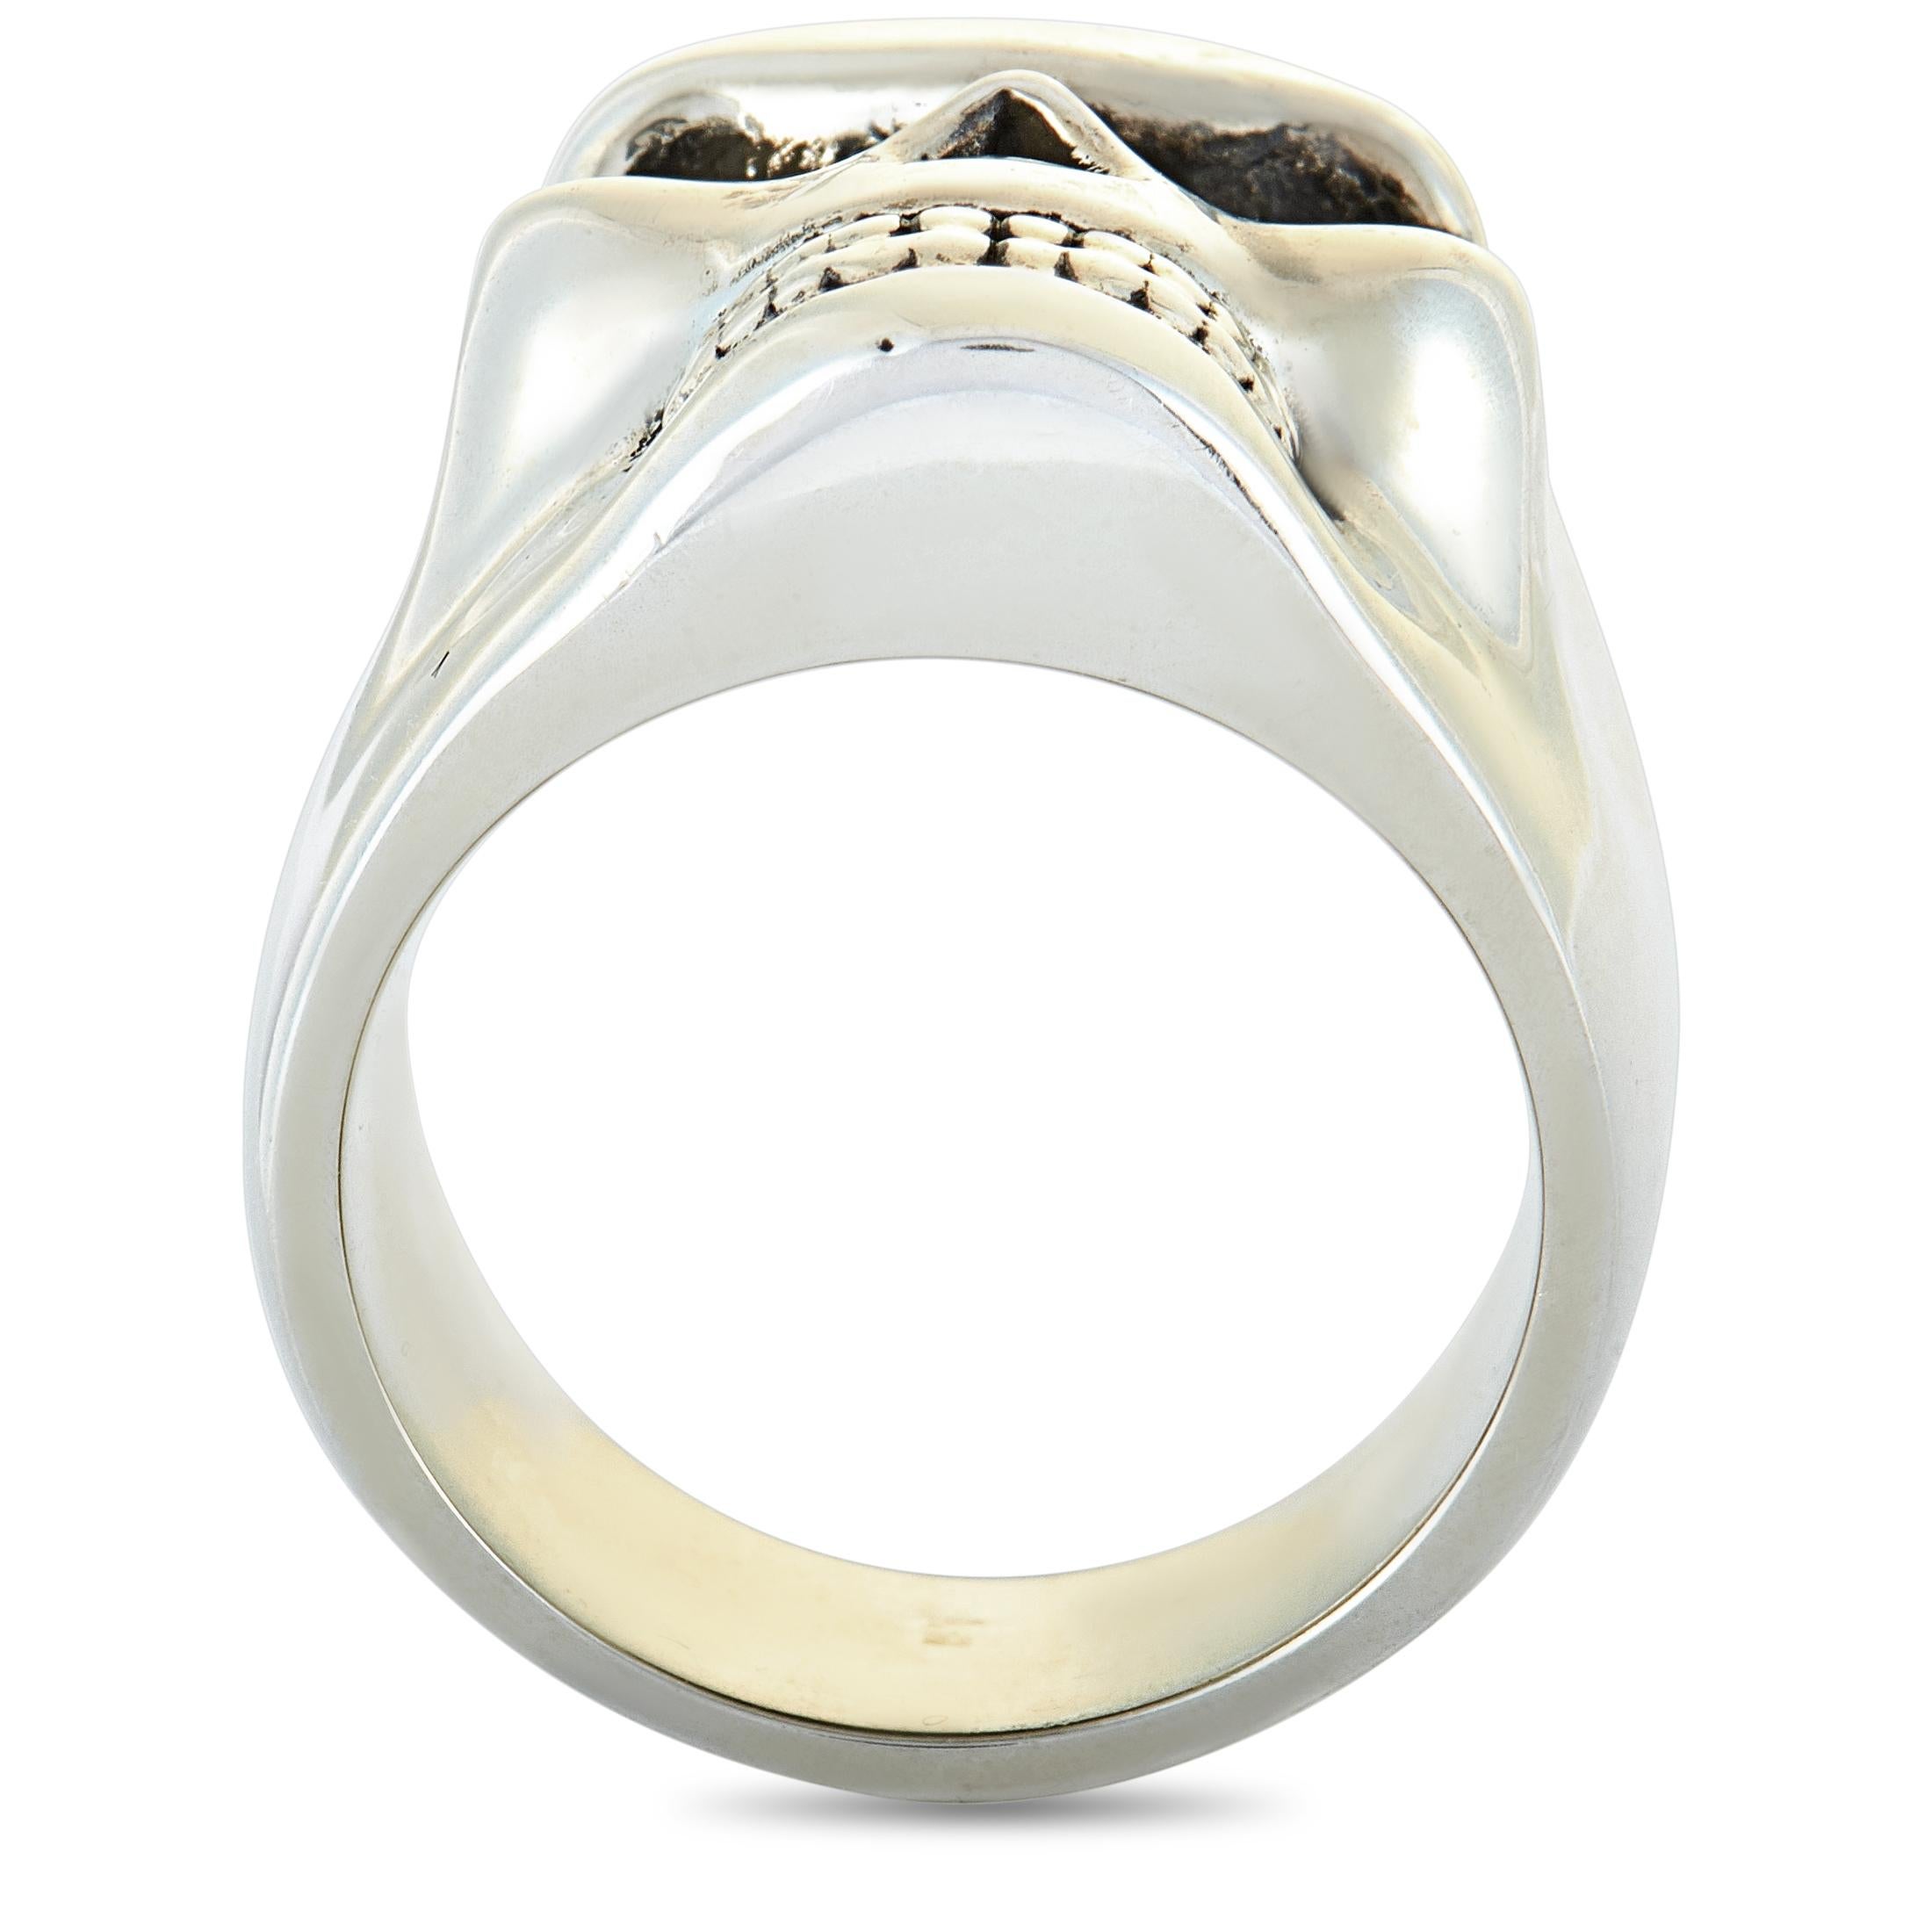 This King Baby ring is crafted from sterling silver and weighs 23.8 grams. The ring boasts band thickness of 9 mm and top height of 5 mm, while top dimensions measure 15 by 22 mm.

Offered in brand new condition, this jewelry piece includes the